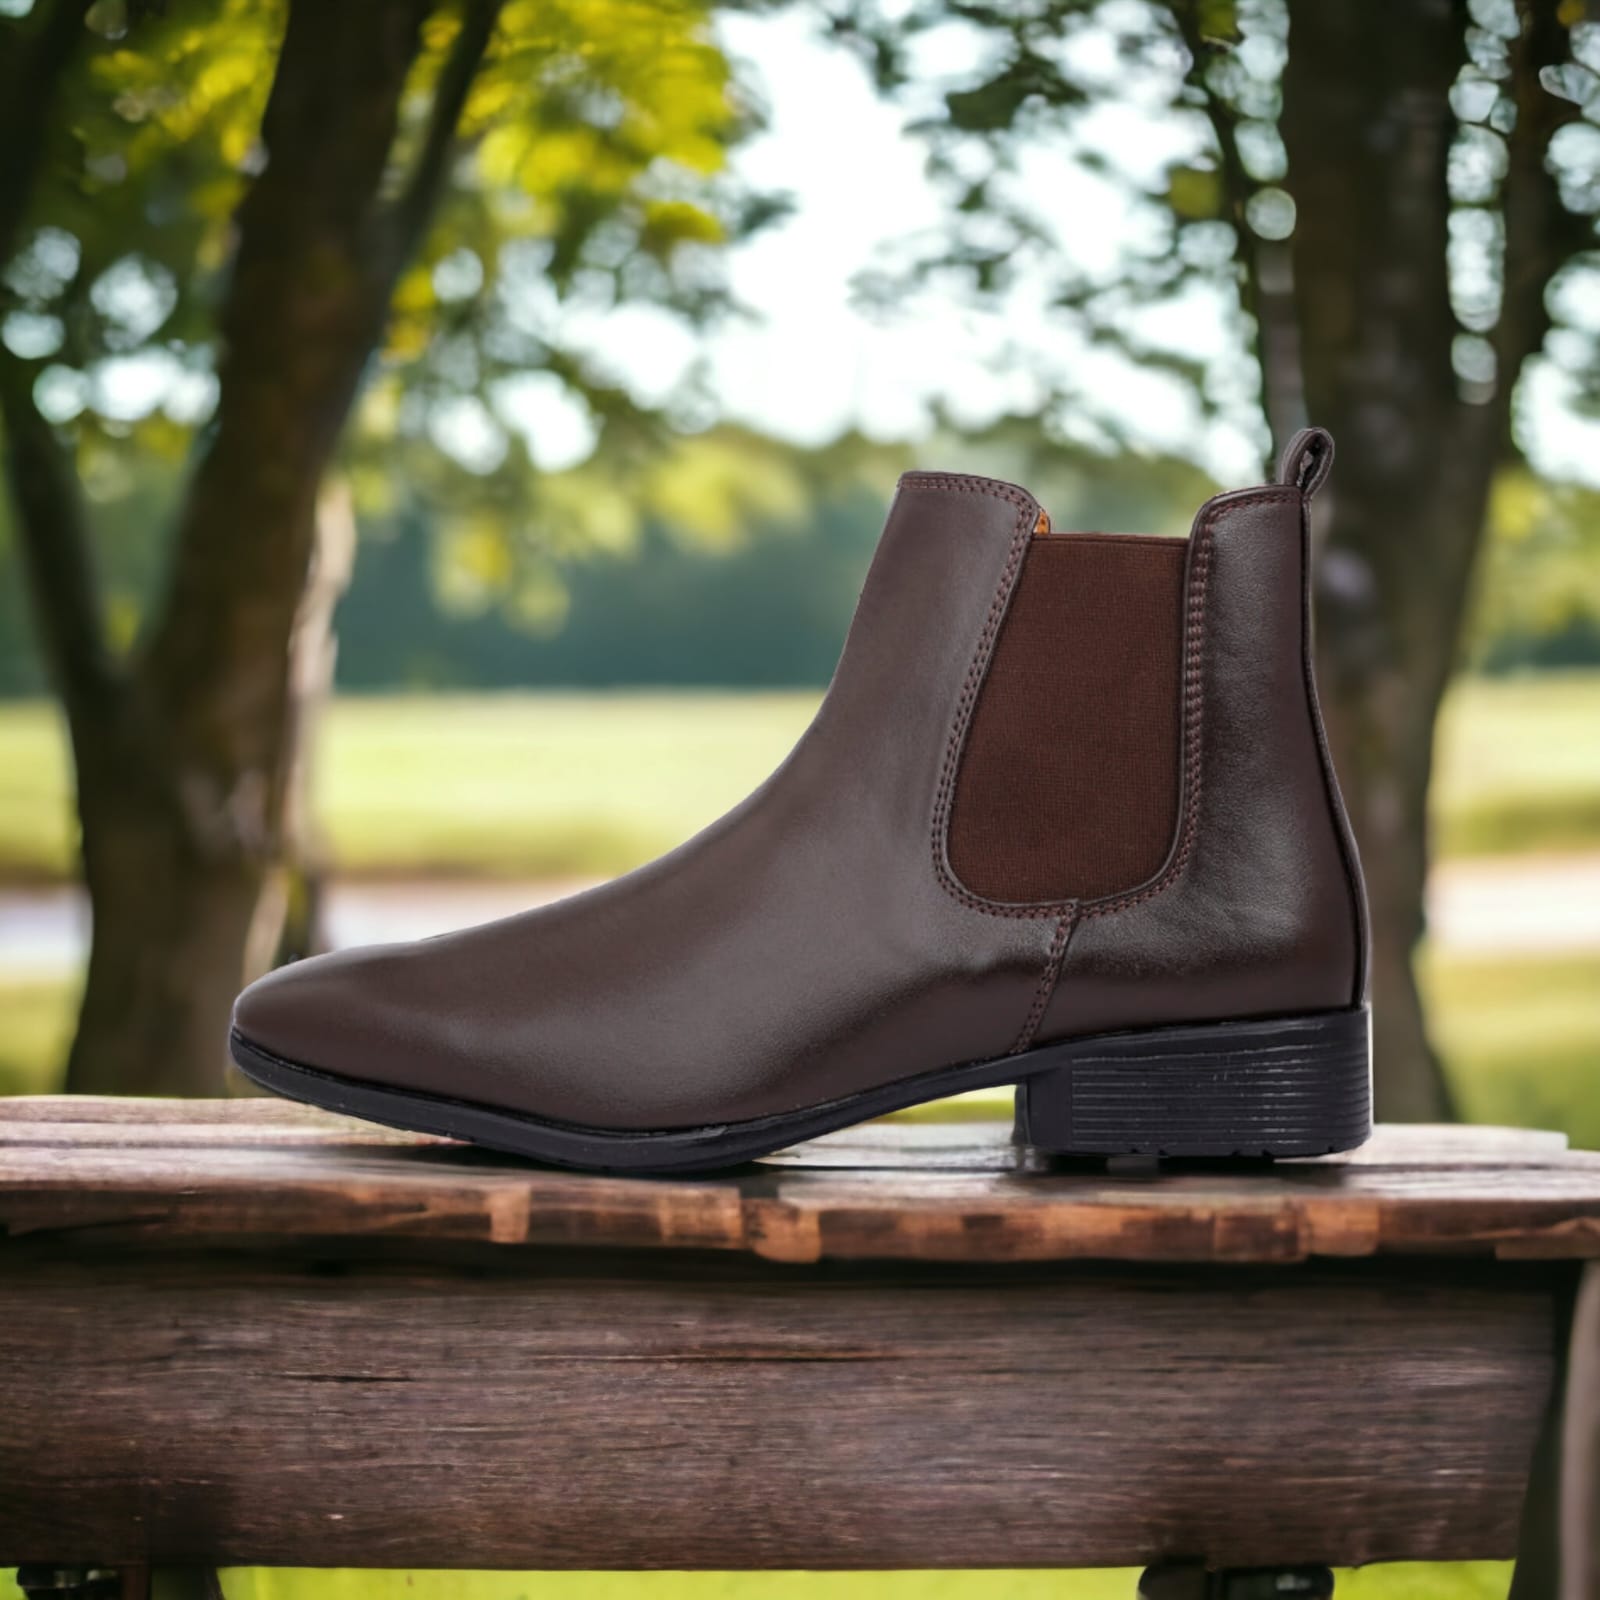 Jack Marc Men's Stylish Brown Formal and Casual Wear British Chelsea Ankle Boots - JACKMARC.COM